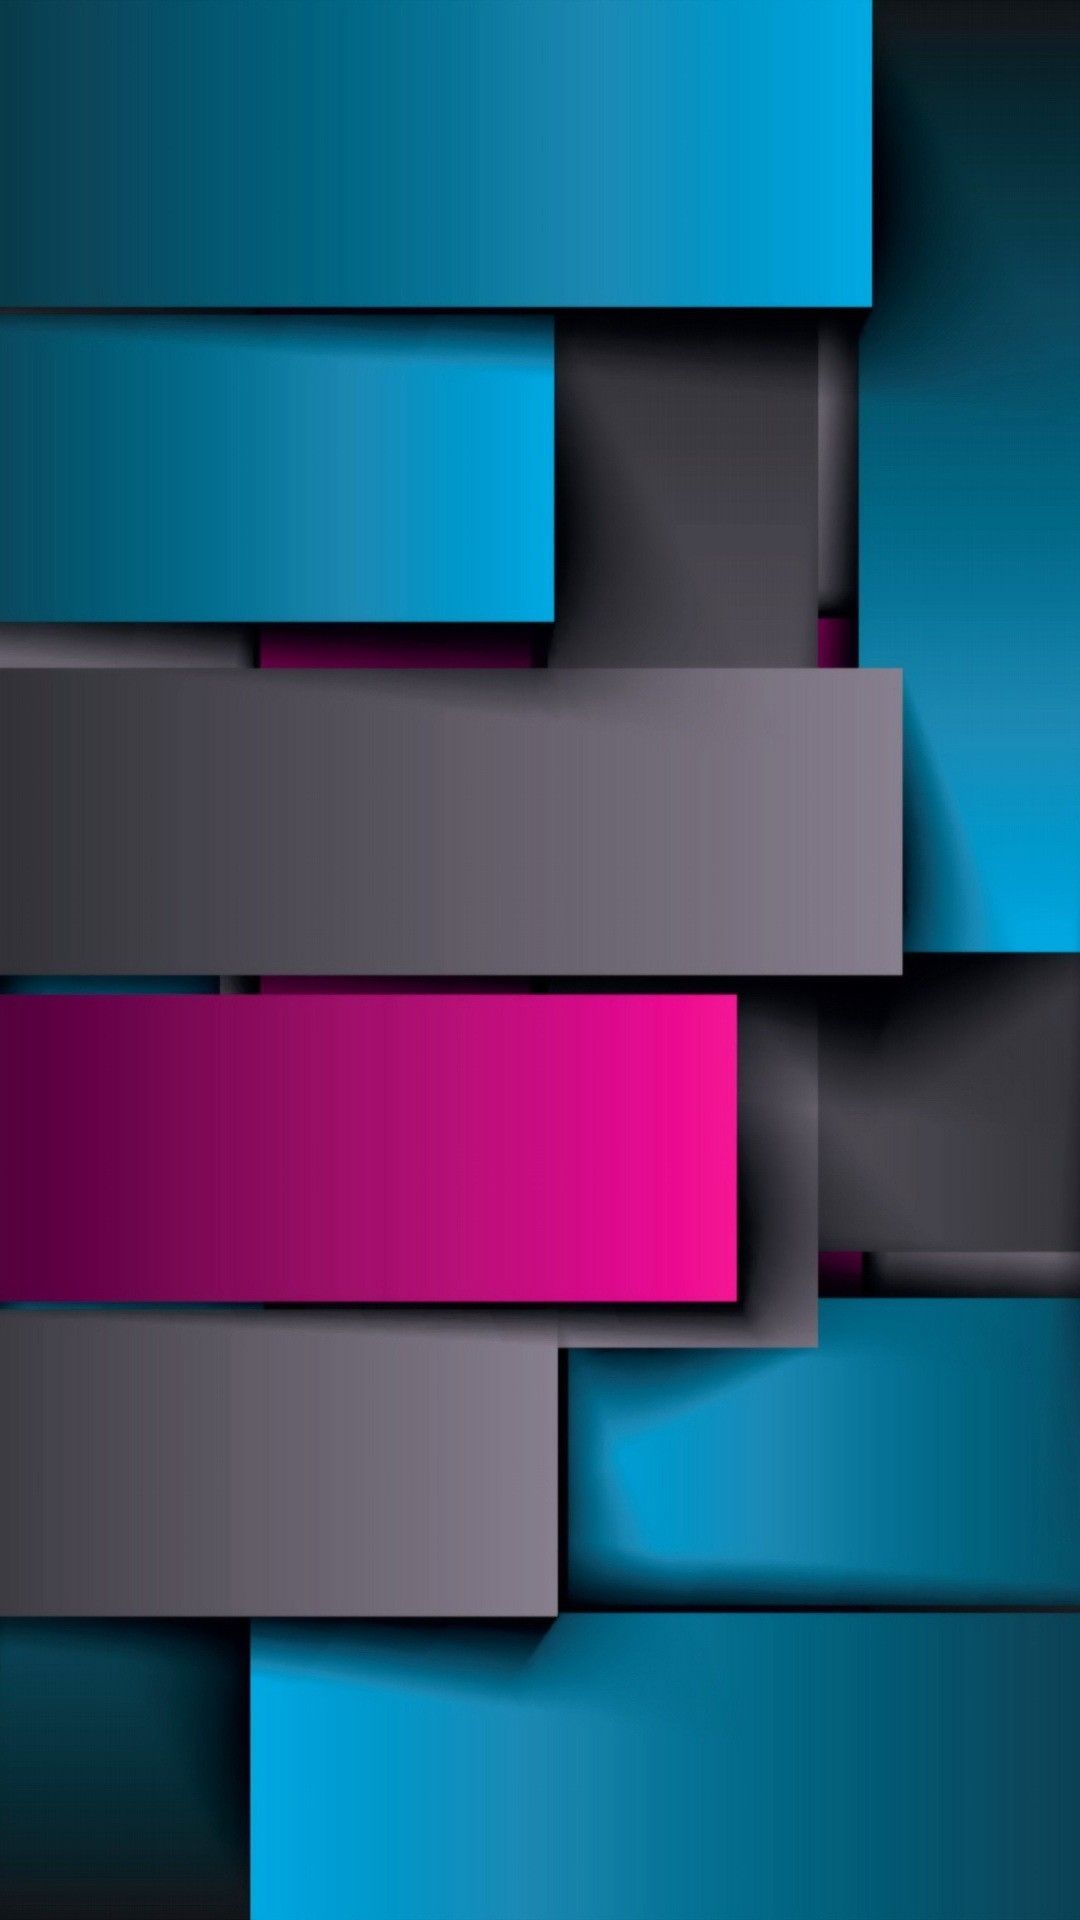 best wallpapers for mobile screen,blue,turquoise,rectangle,azure,violet